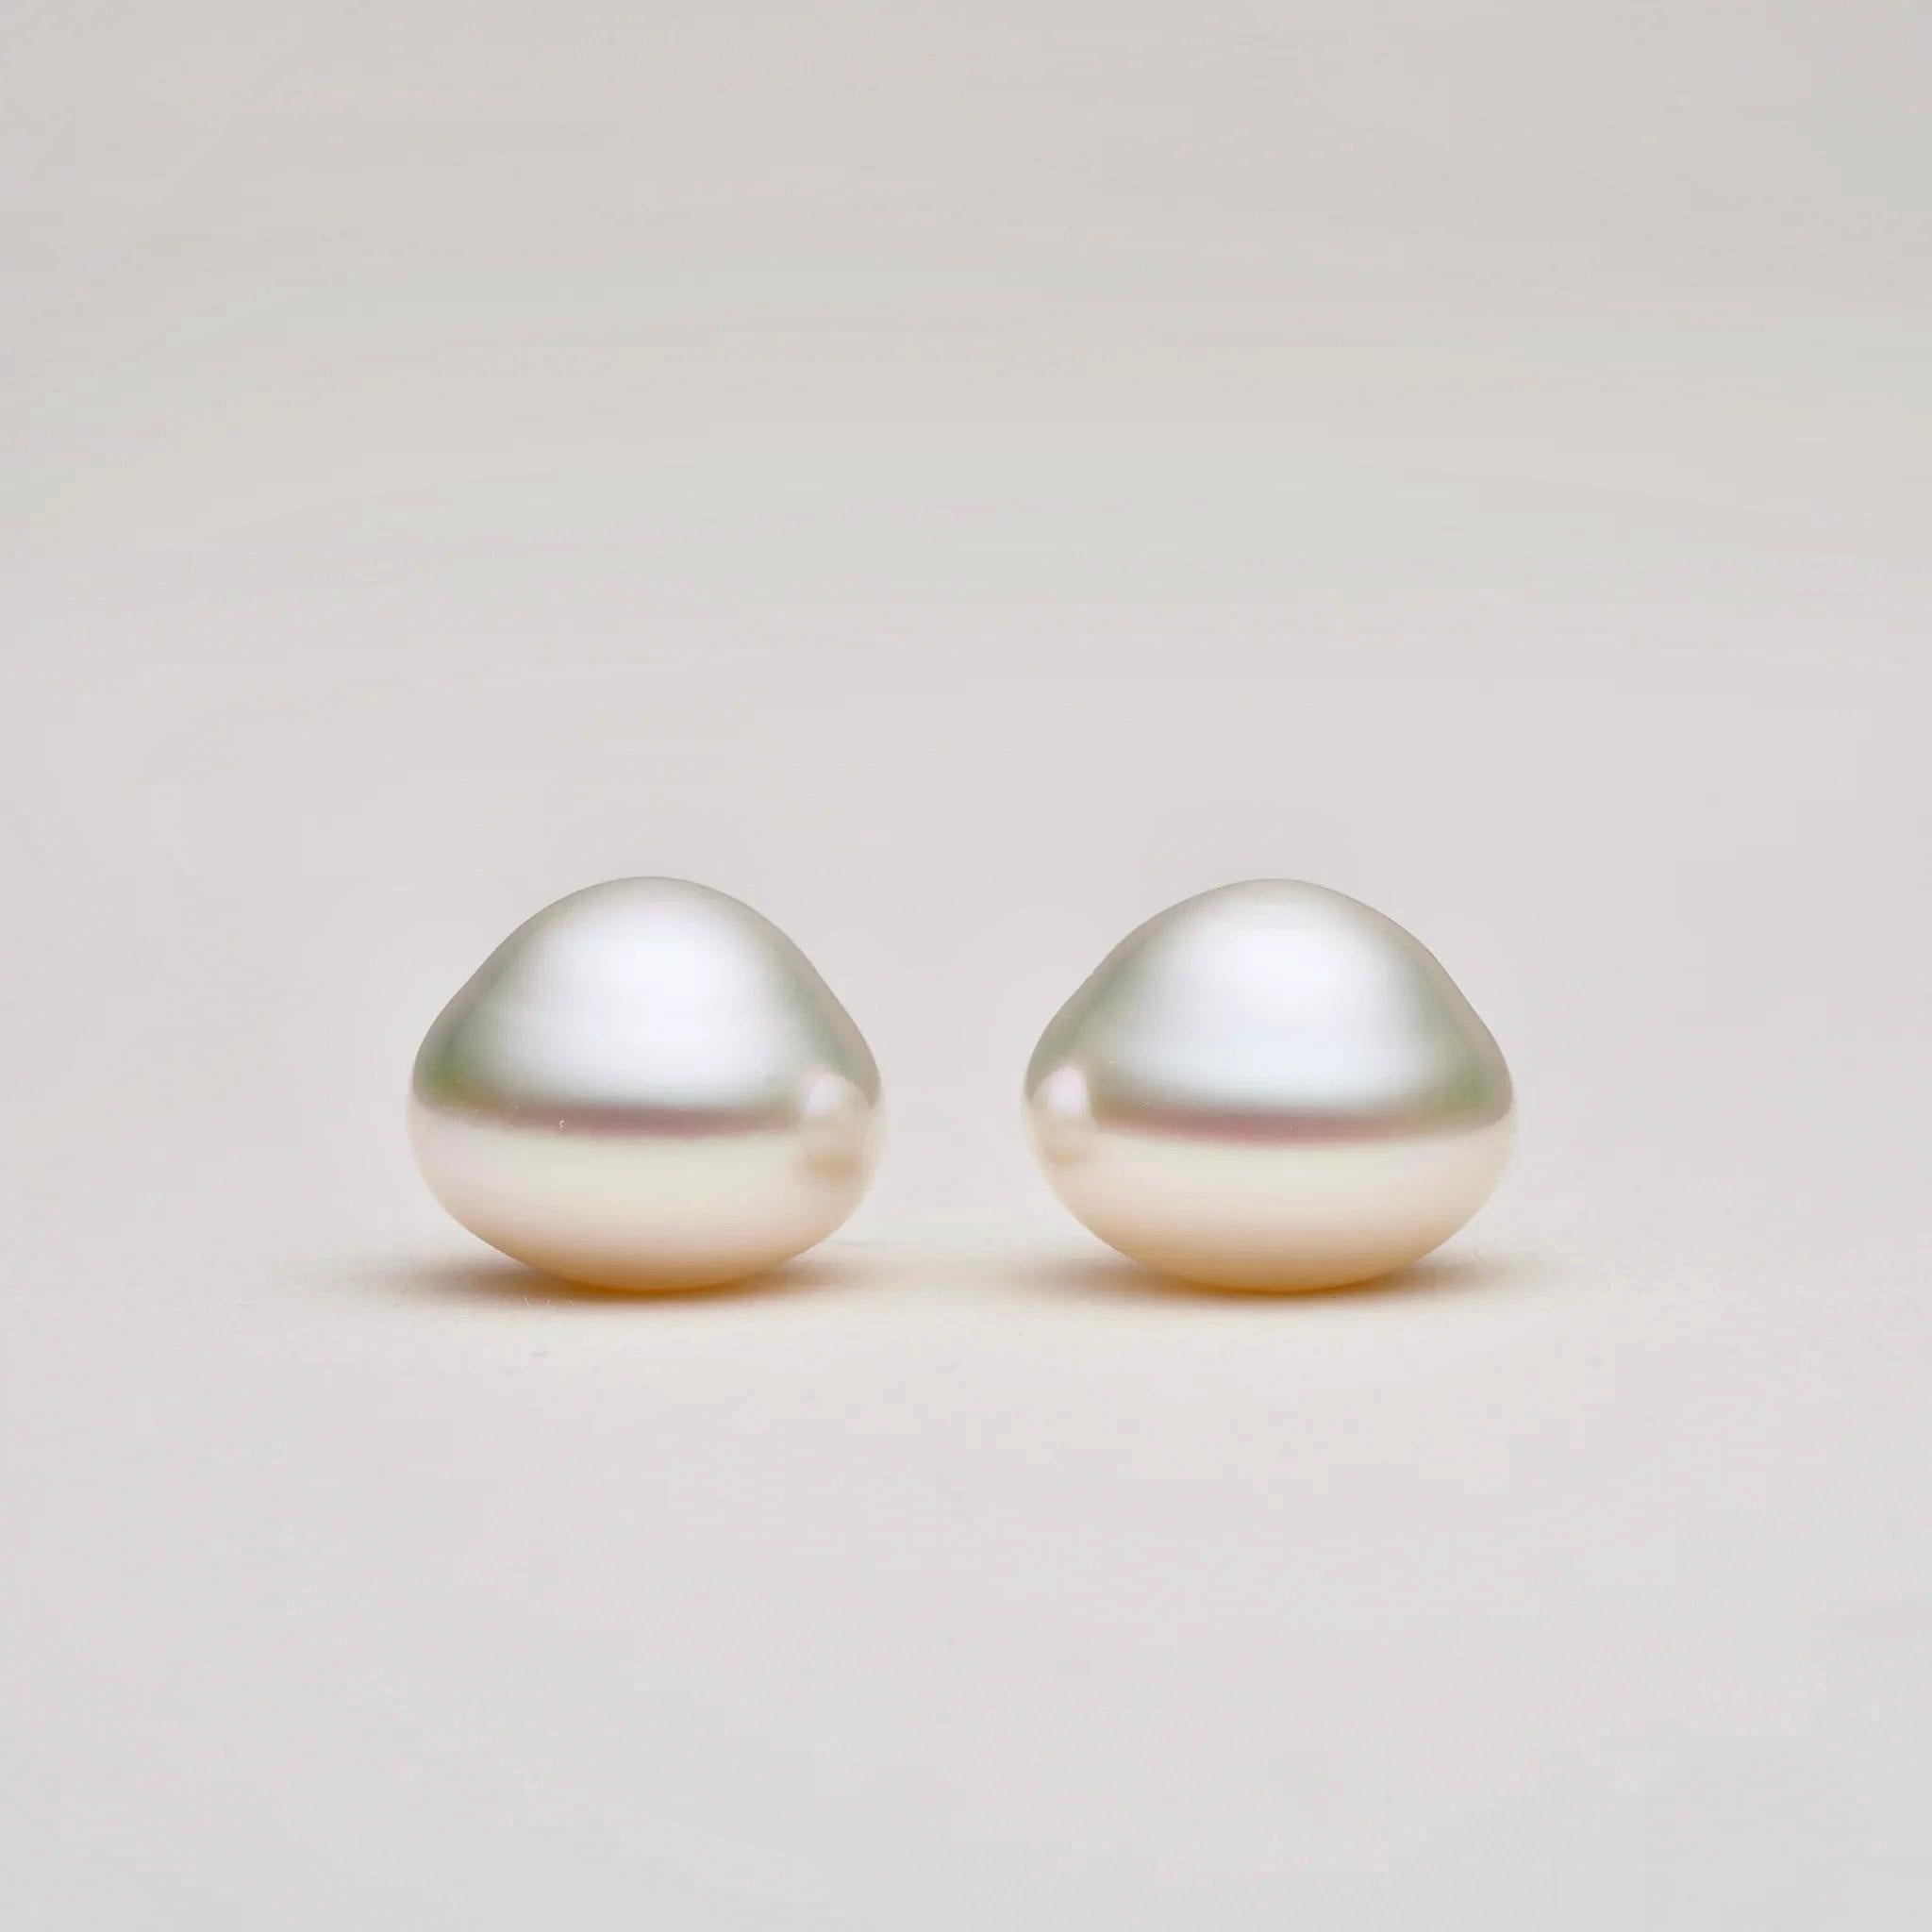 




PAIR OF TRIANGLE 14 MM PEARLS, FLAWLESS COMPLEXION, AA LUSTRE, WHITE WITH GREEN OVERTONE.

Australian South Sea pearls are cultured through a respectful partnership with nature. Australia’s wild pearl oyster fishery is certified by the Marine